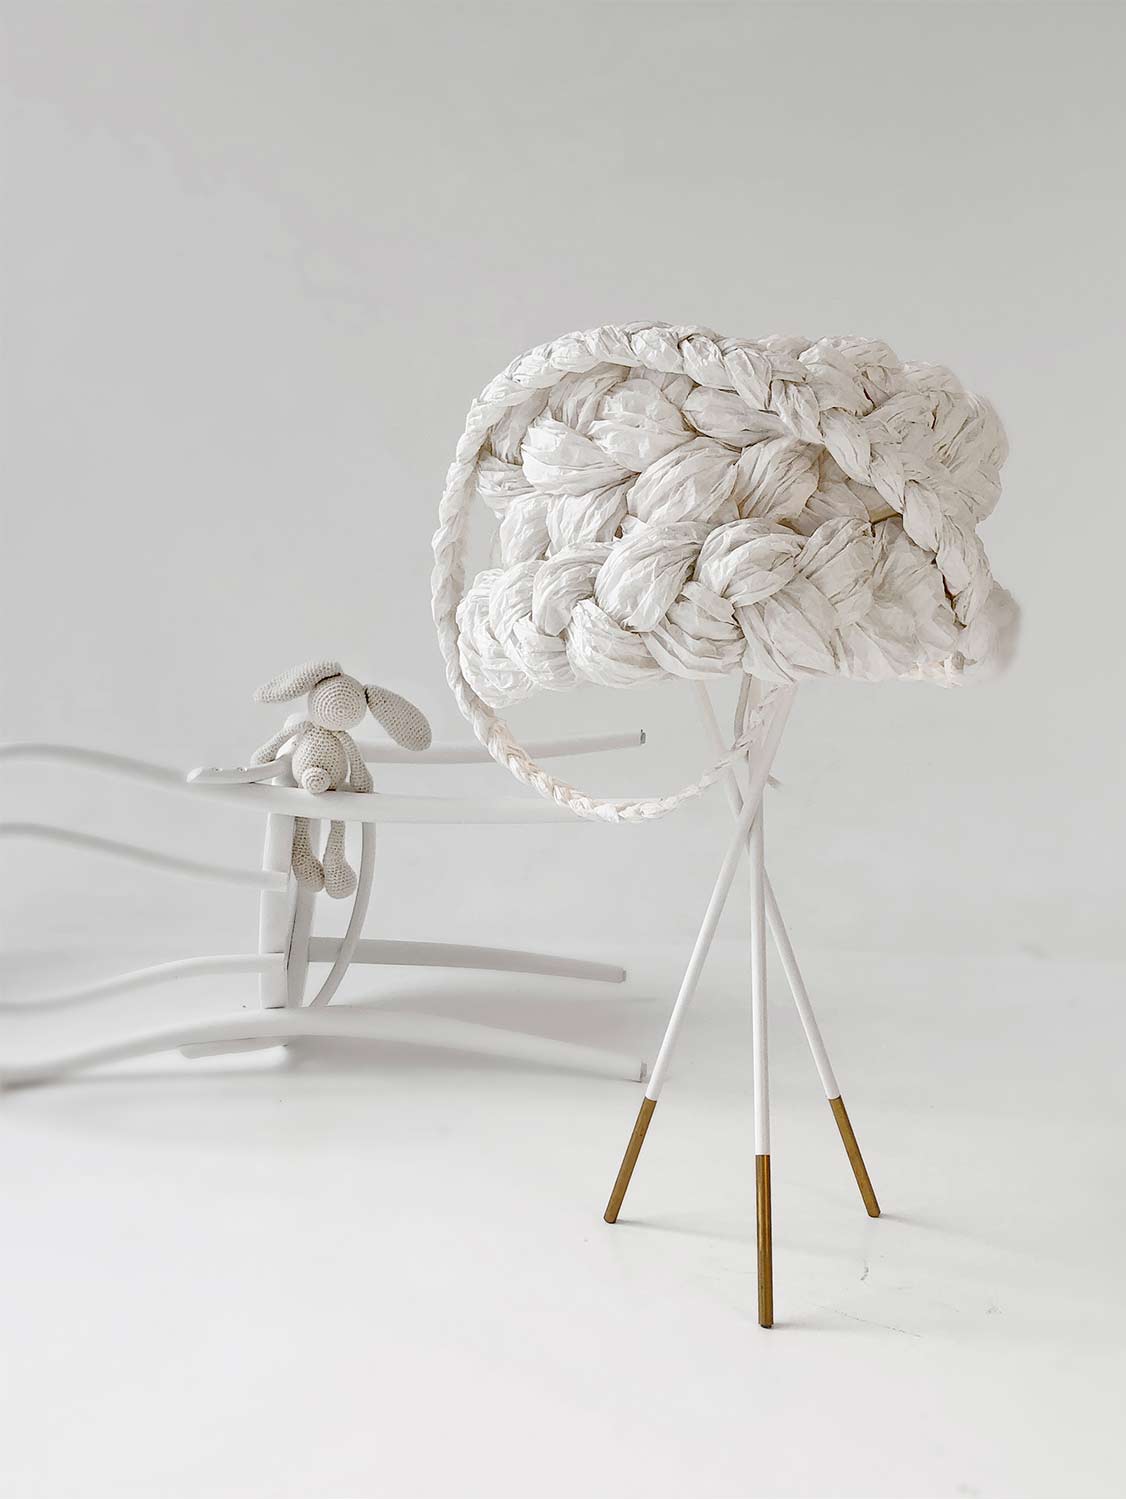 White Paper Braided Unique Handmade Table Lamp | Cozy Atmosphere Lighting | Contemporary Natural Lighting for Living room,  Bedroom & Lobby | Sustainable Design Lighting | baby & kids room lighting | White interior | mammalampa The Bride table lamp 